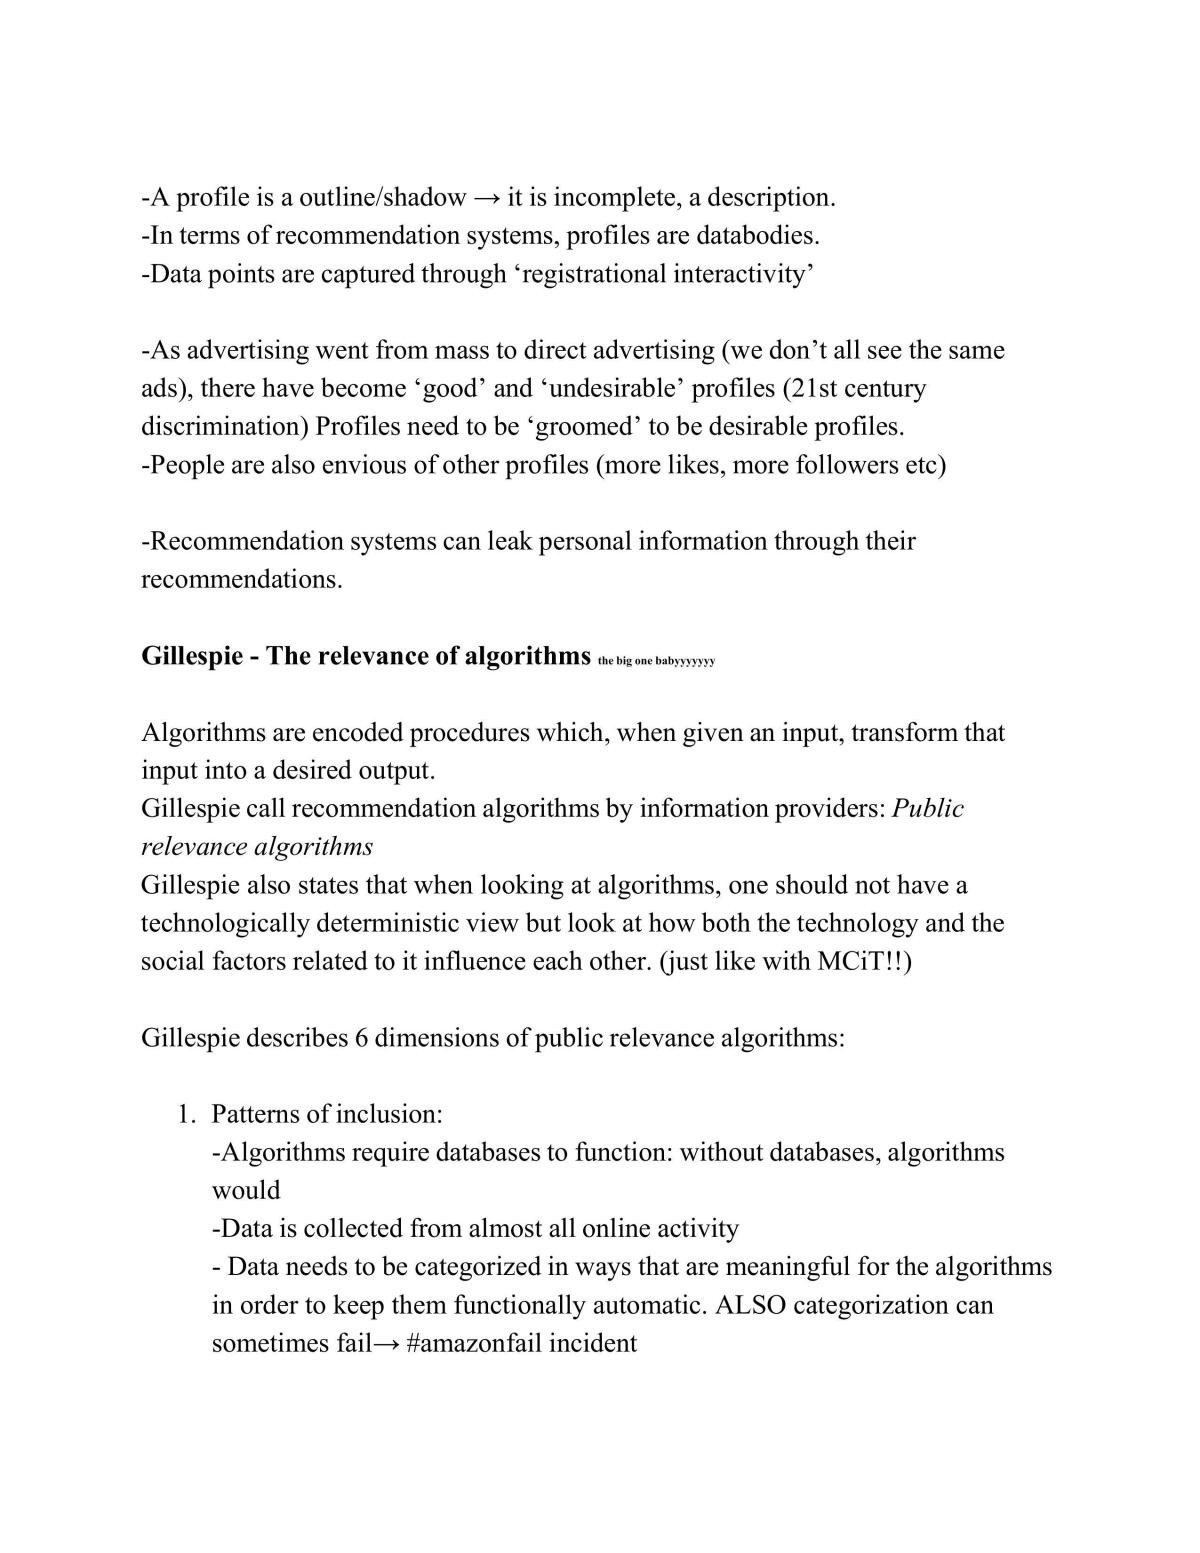 Directed Reading in Digital Culture Notes - Page 12